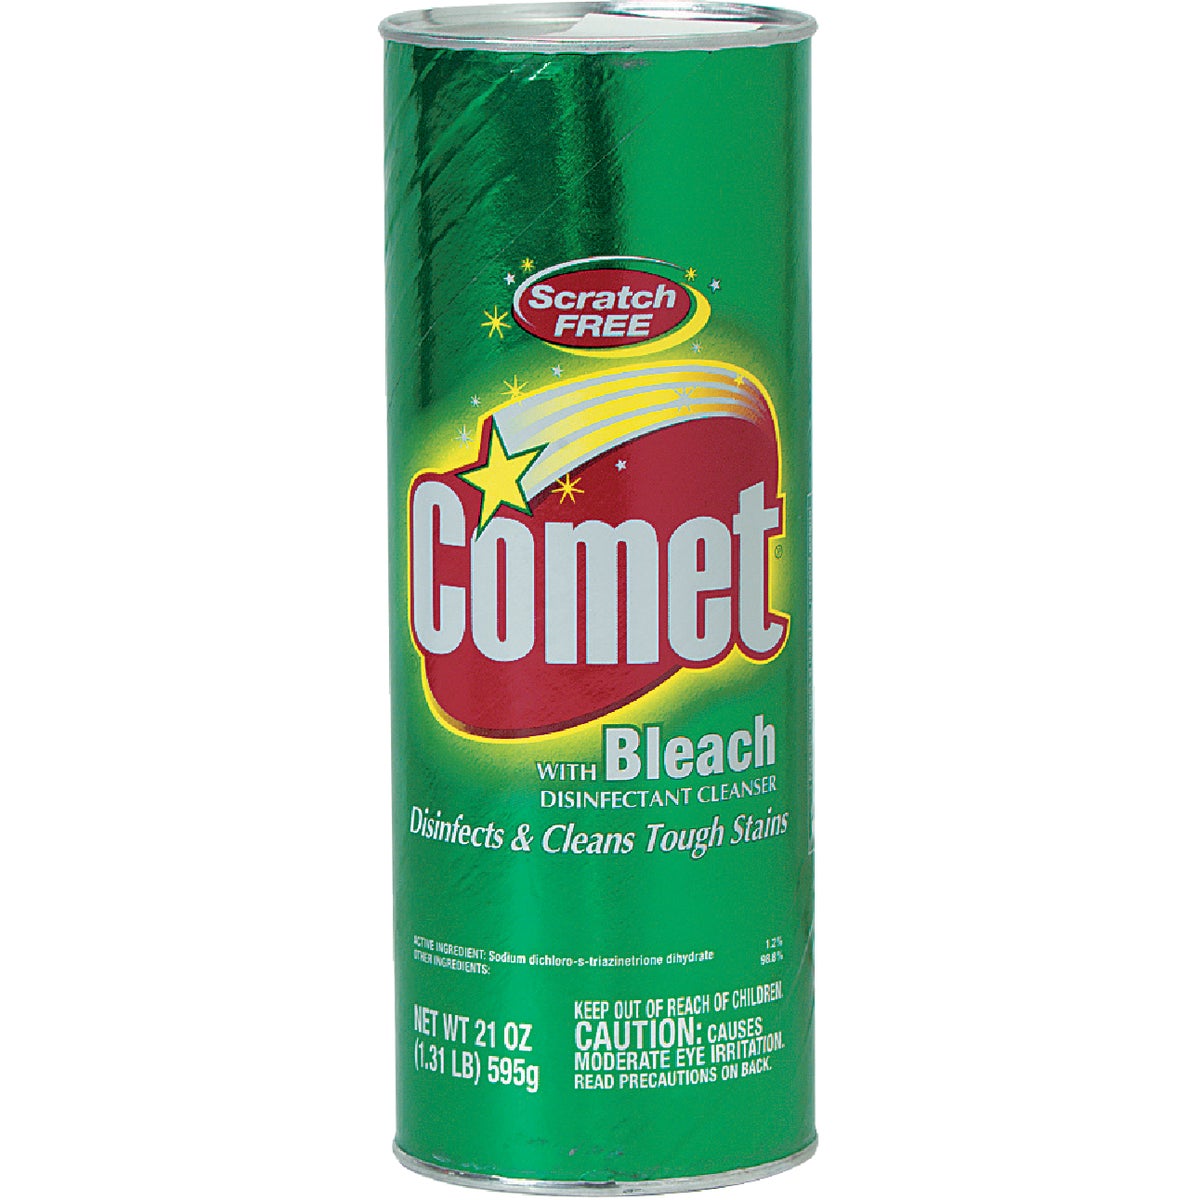 Item 624989, Scratch-free Comet with bleach disinfectant cleaner.